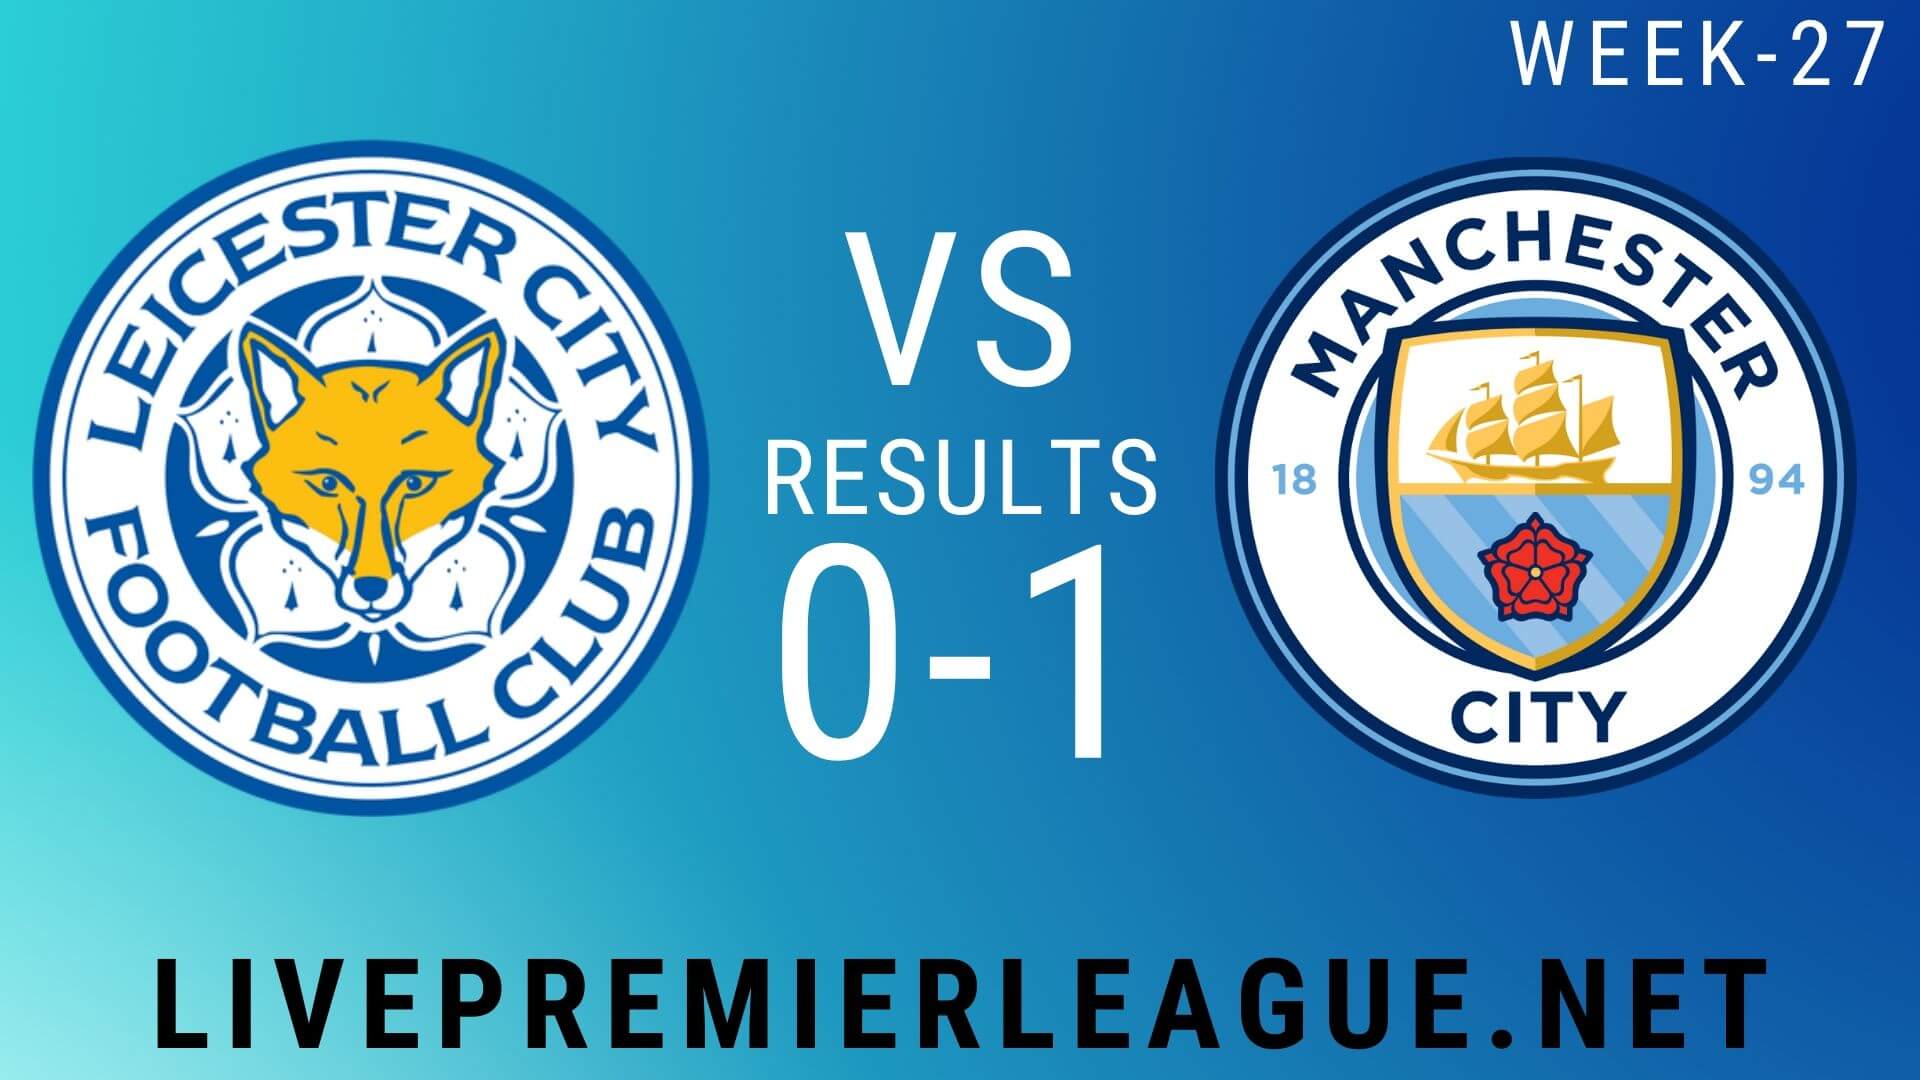 Leicester City Vs Manchester City | Week 27 Result 2020